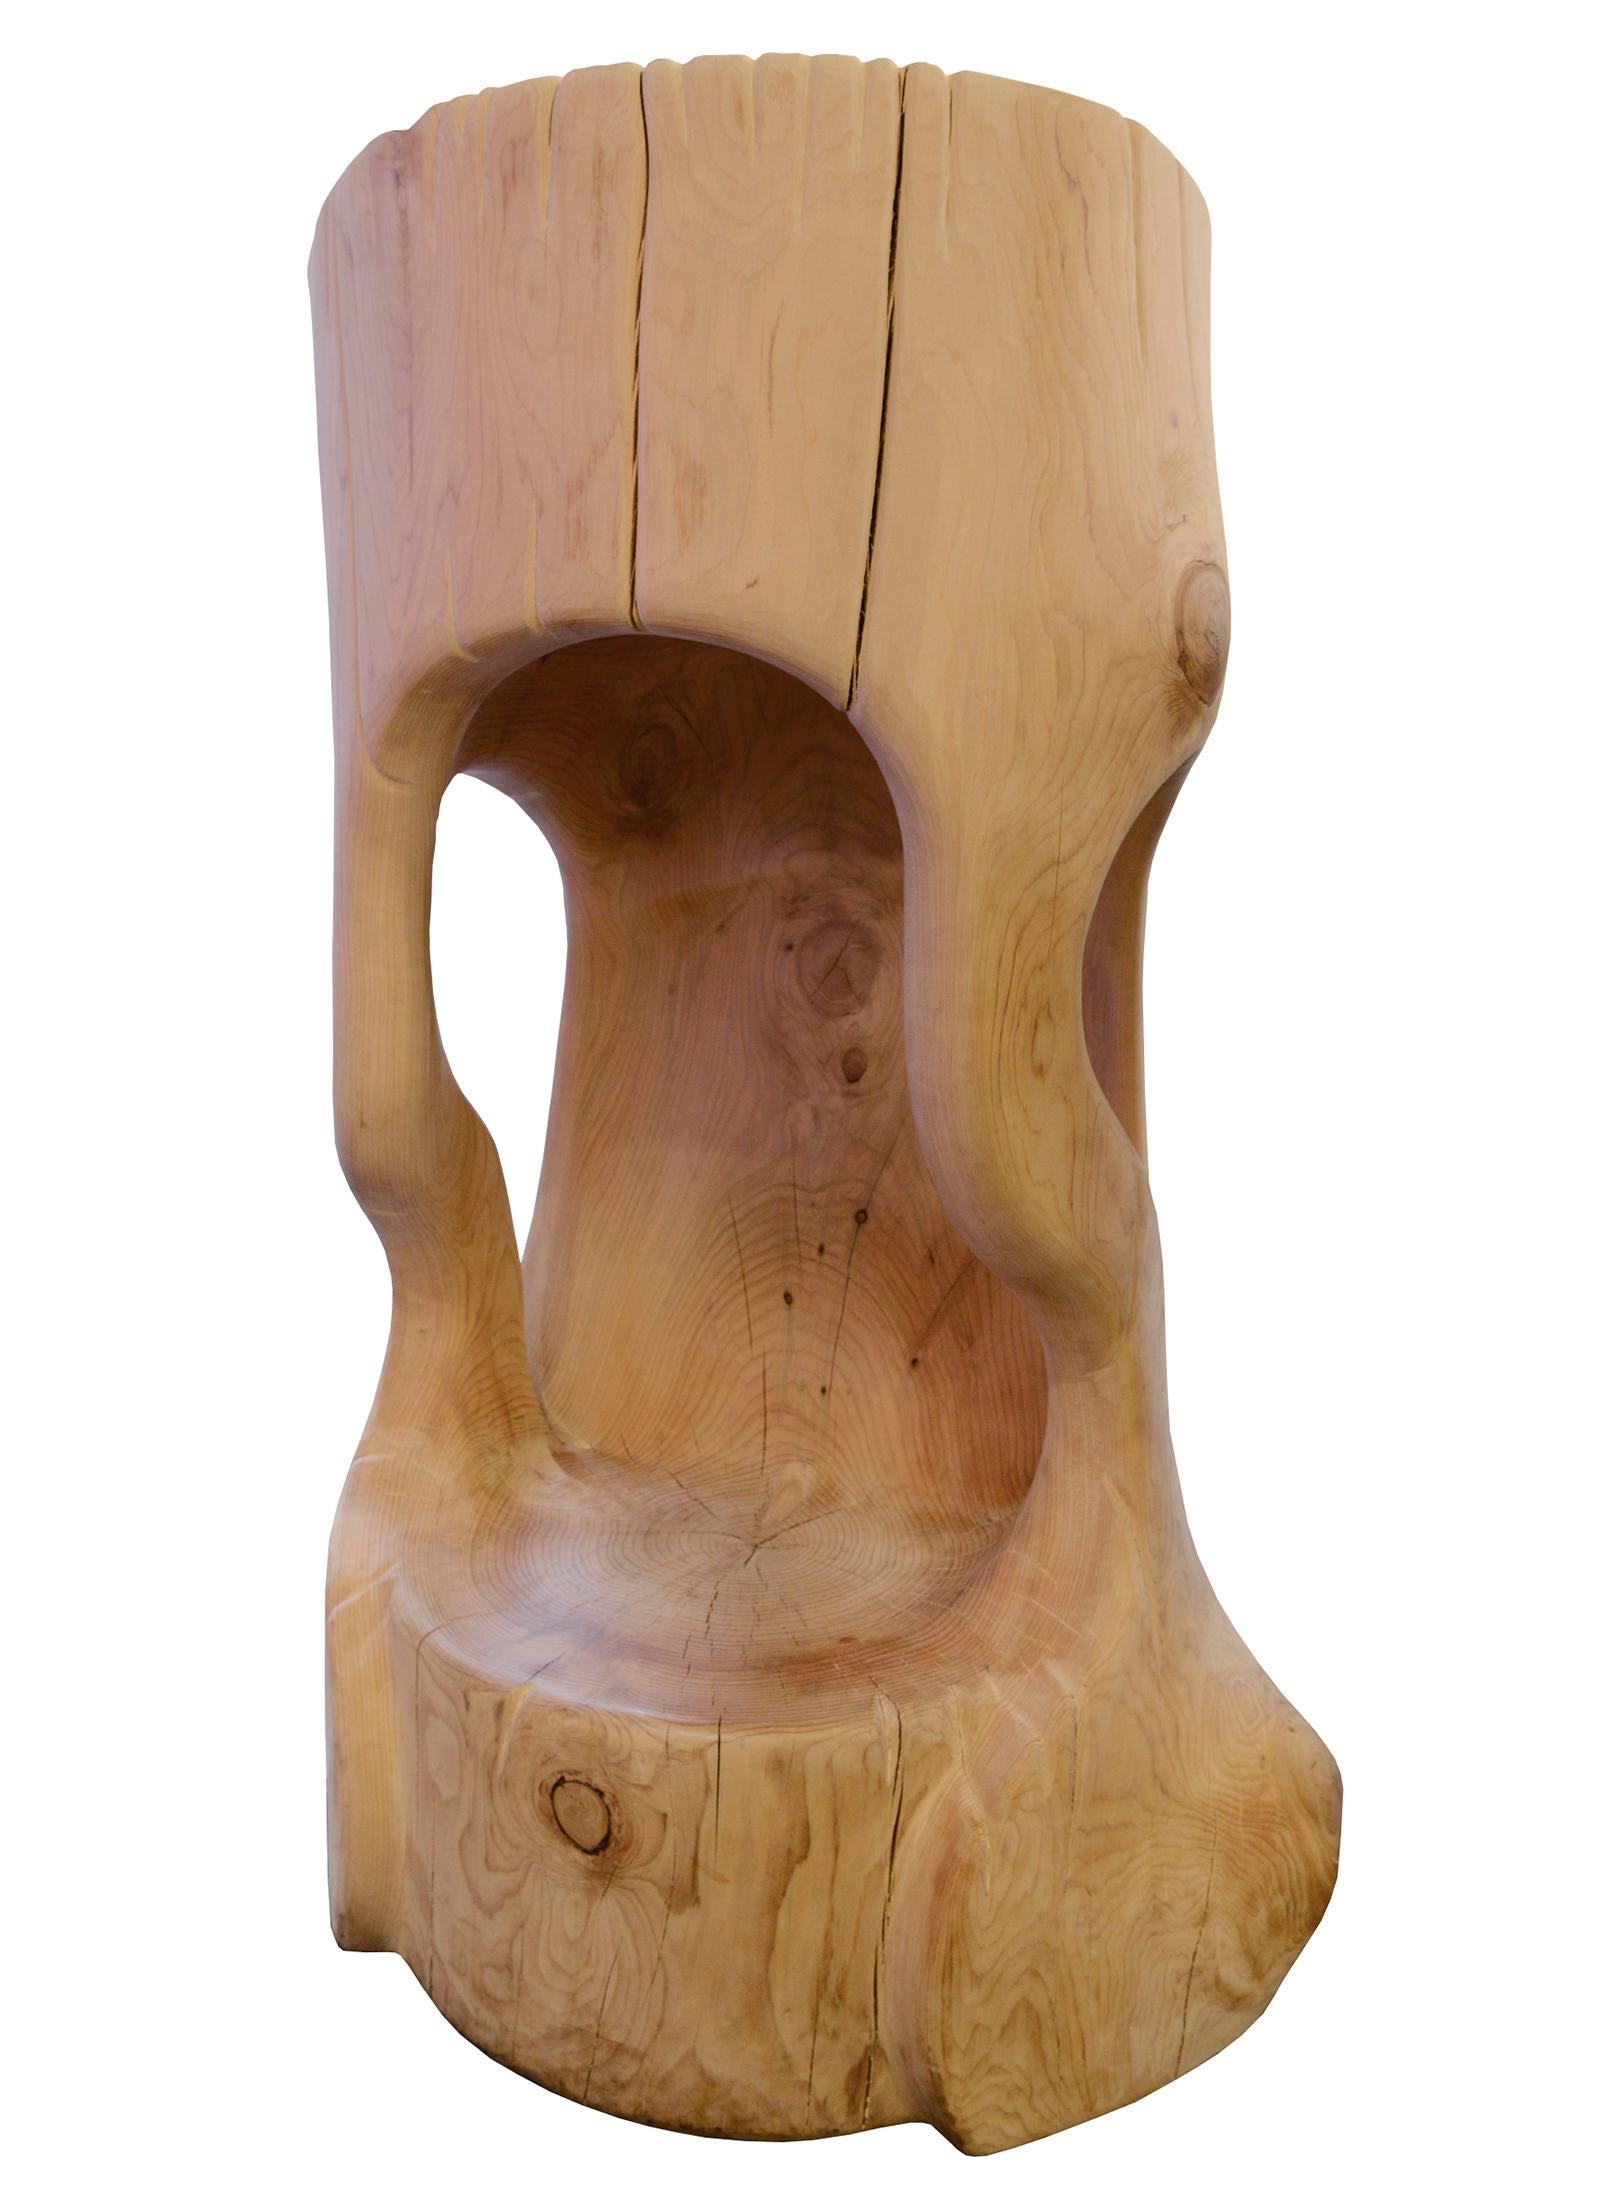 Throne Cedar Large made with natural raw cedar wood,
hand carved from a death cedar tree trunk, hand-
polished and naturally treated to have the cedar
essence smell. Exceptional and unique piece.
Made in France in 2021.
Solid cedar wood include